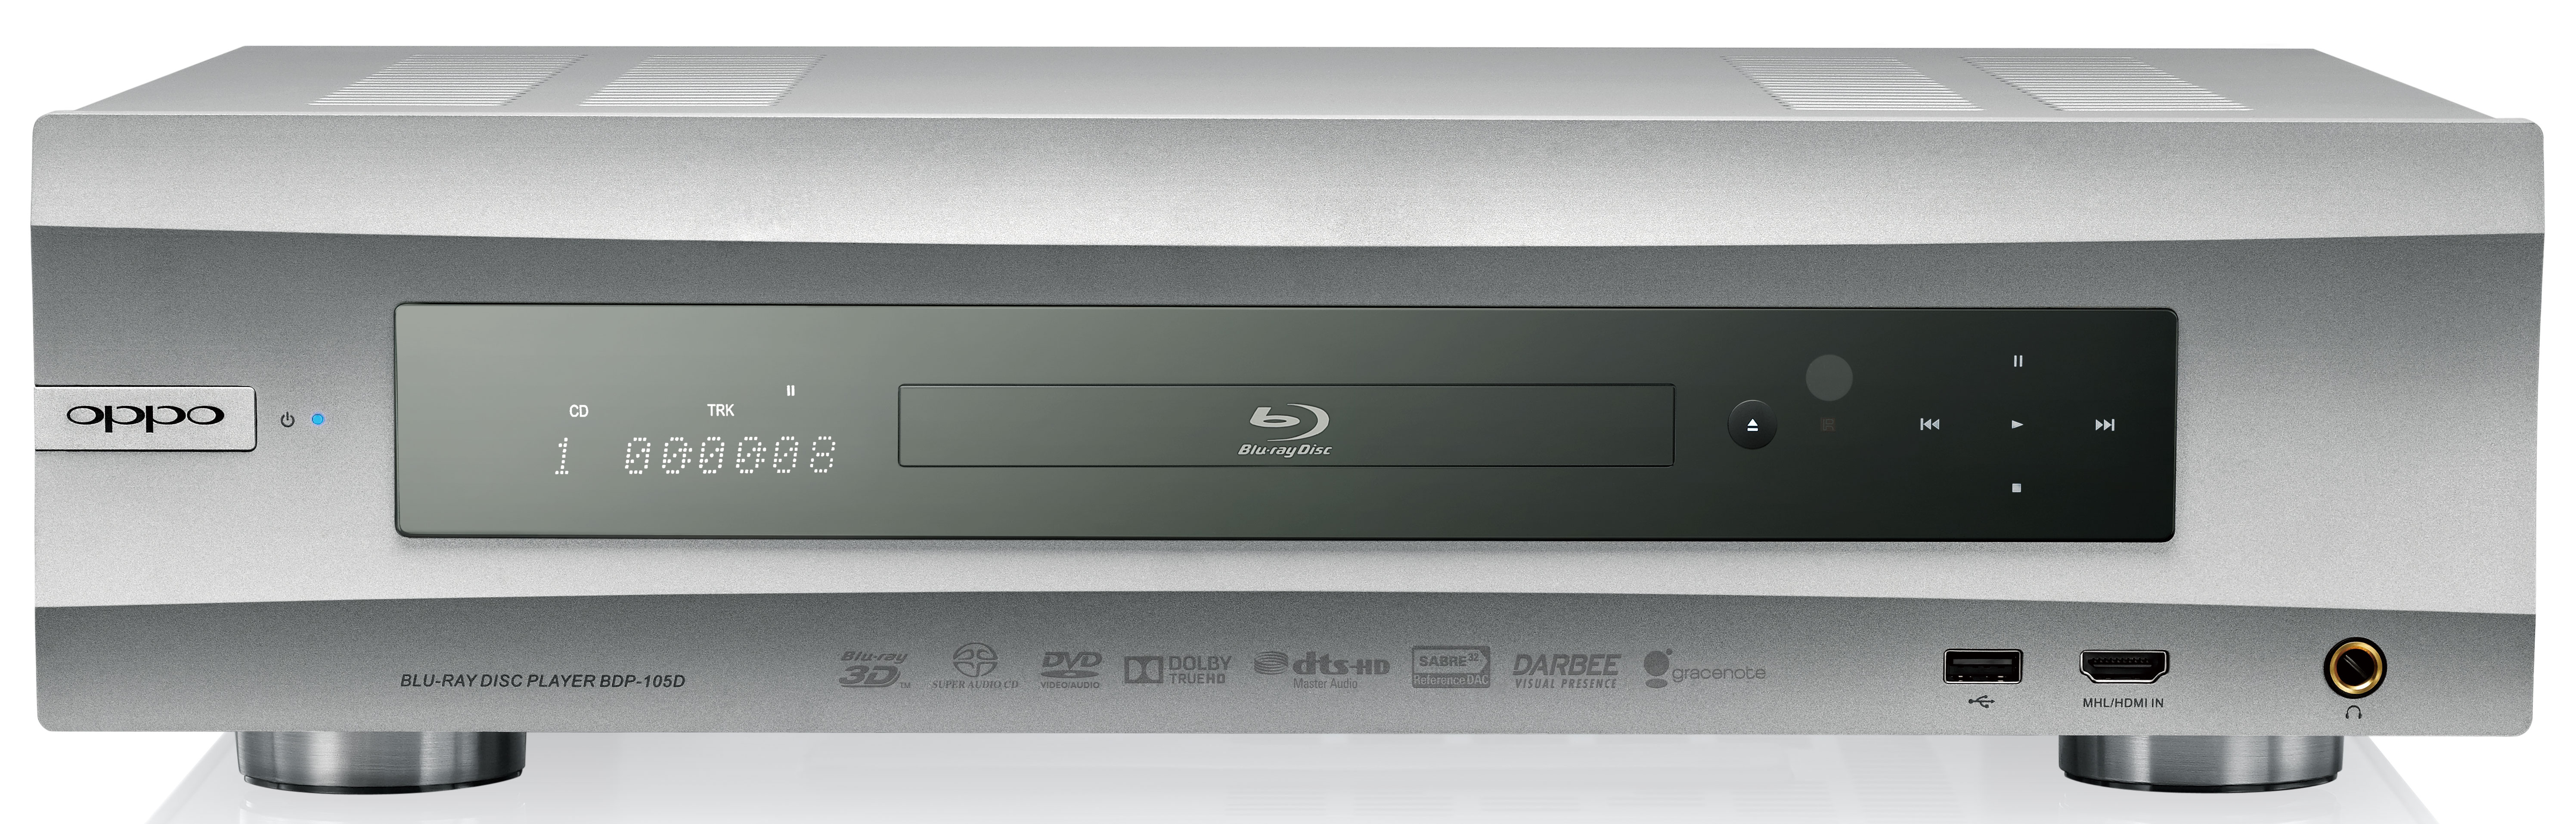 Oppo Blu-ray Disc Player BDP-105D (Silver)